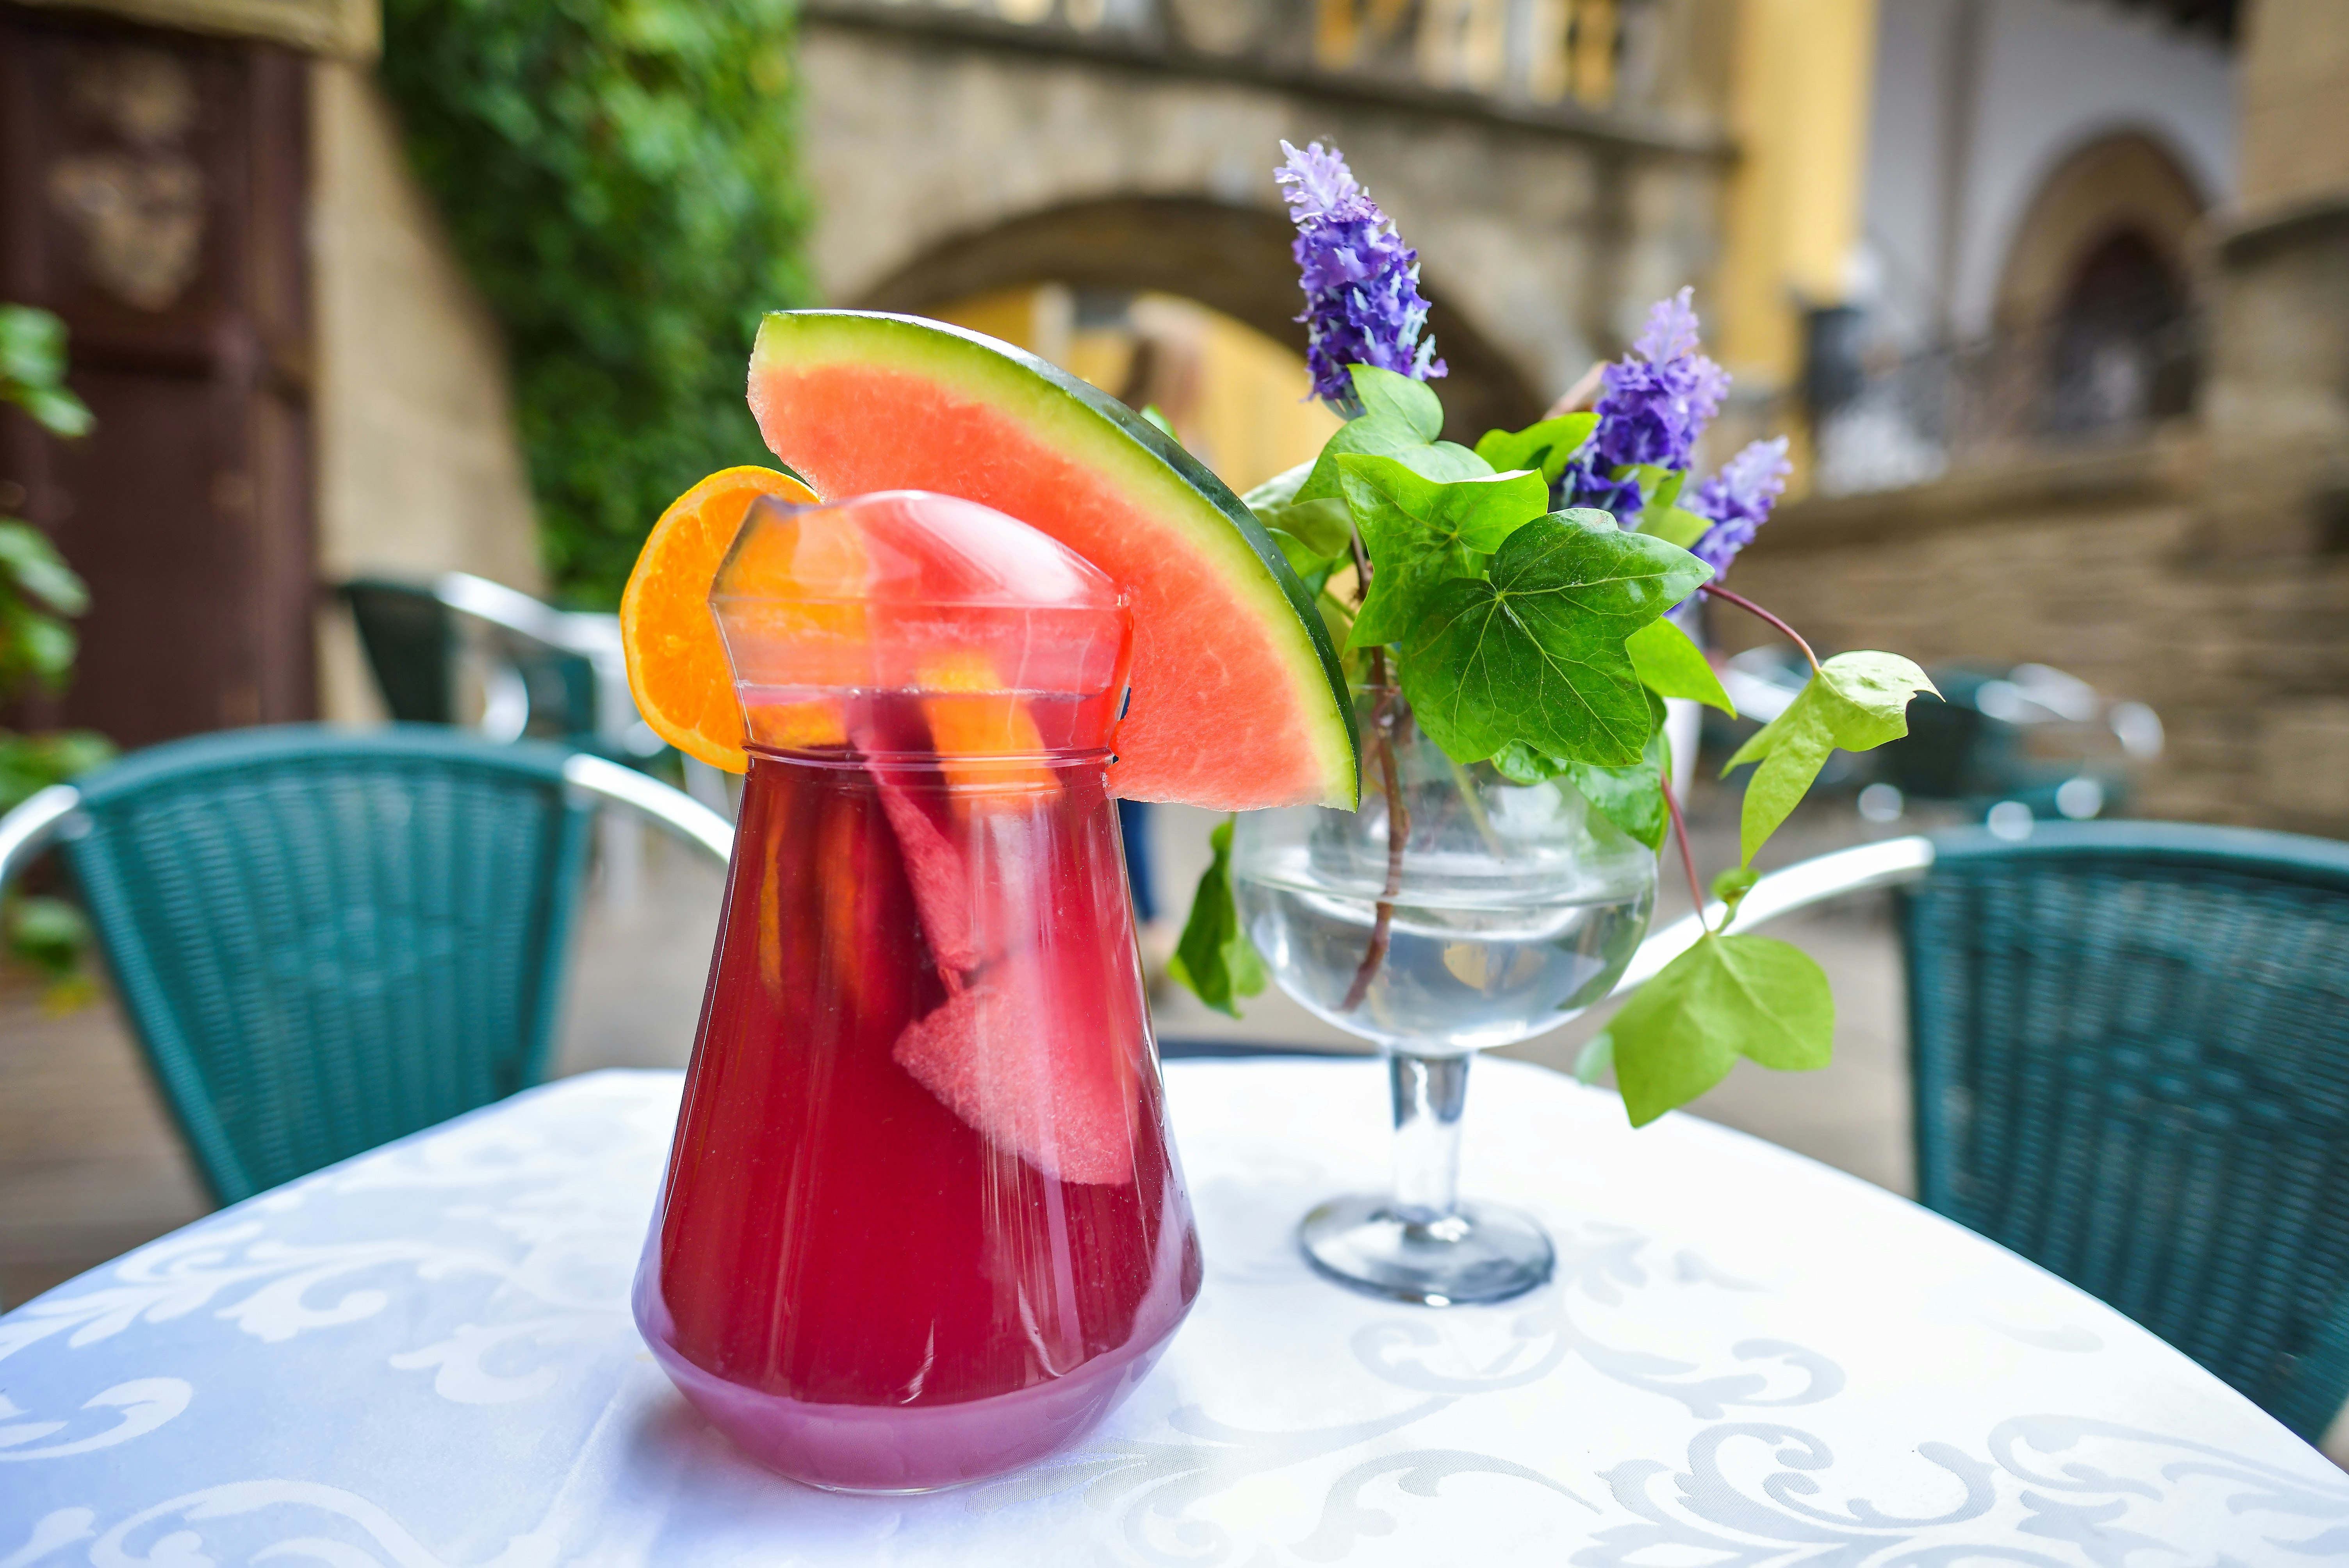 A large glass of ruby-colored Sangria. A large wedge of watermelon and orange slice hang off the rim of the glass.